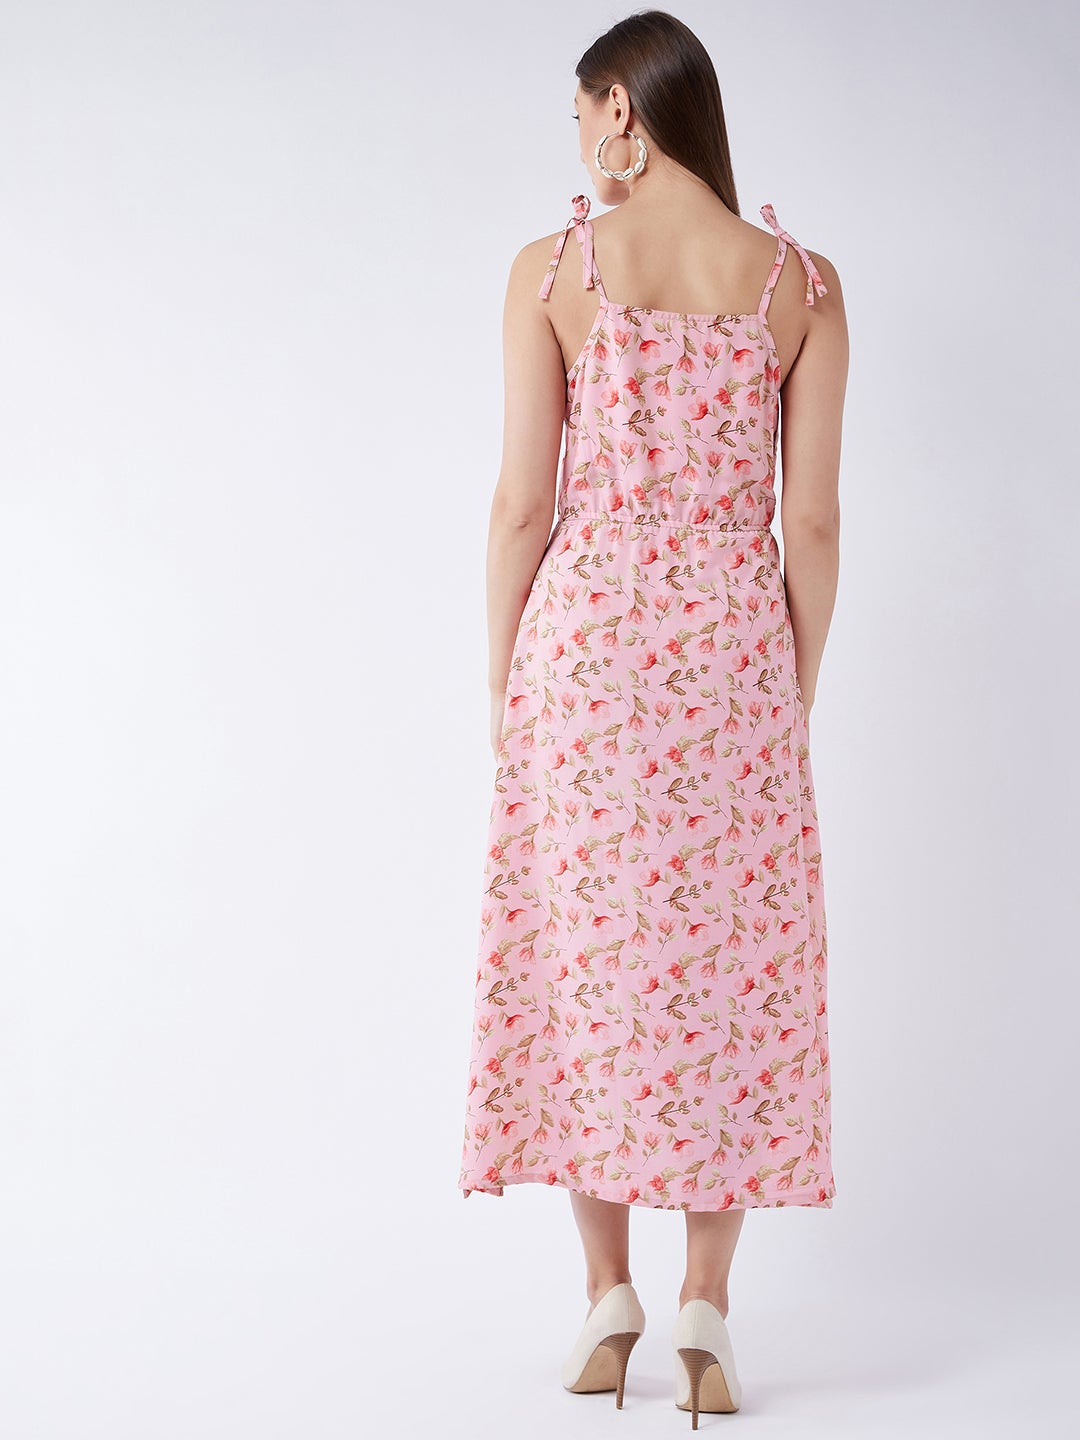 Baby Pink Floral Elasticated Dress